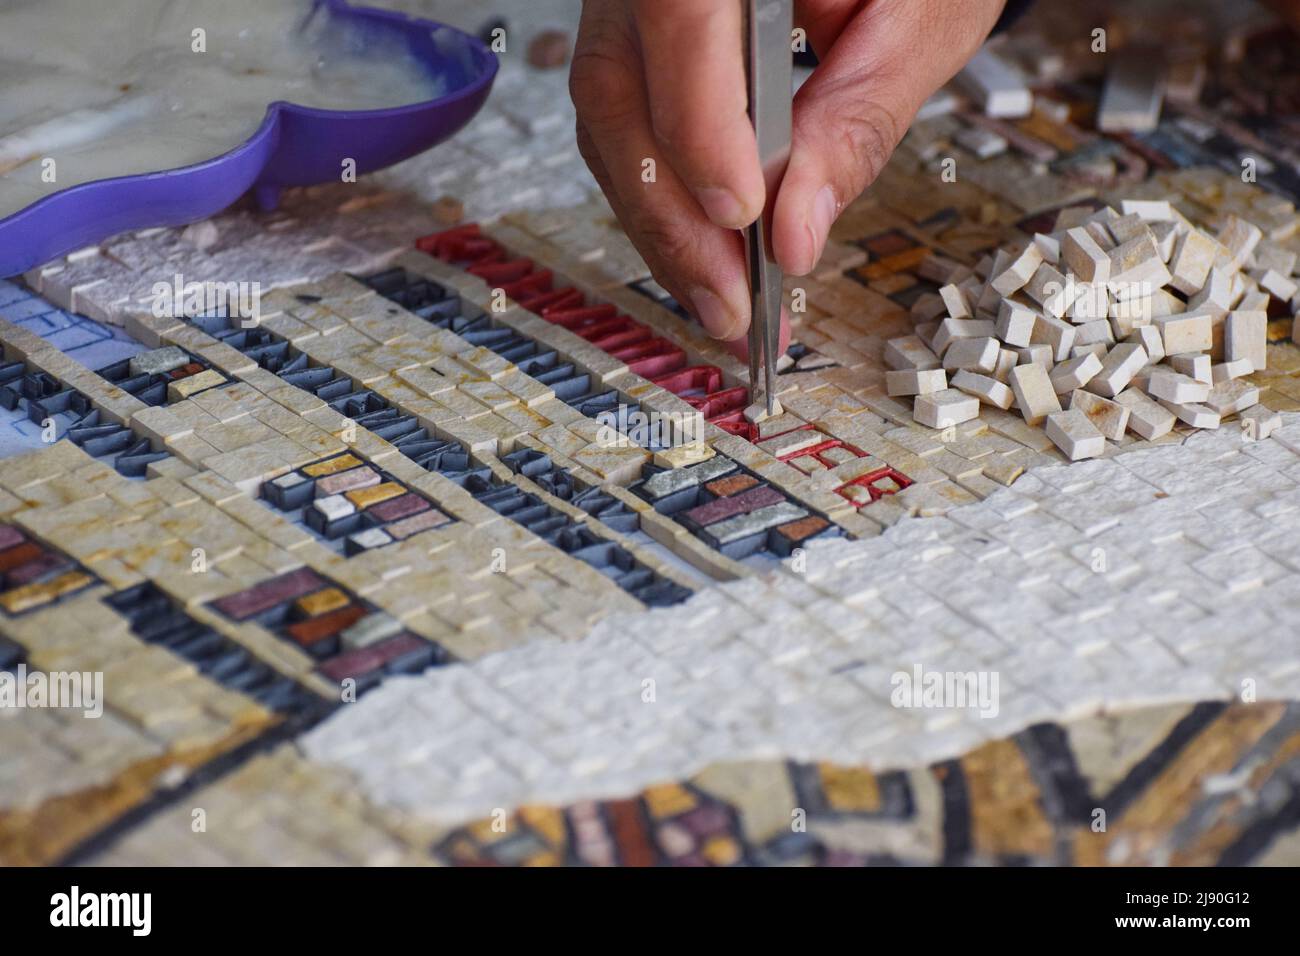 The hand of a Jordanian mosaic maker in action as she glues the tiny tiles in place with tweezers to make a piece of wall art Stock Photo